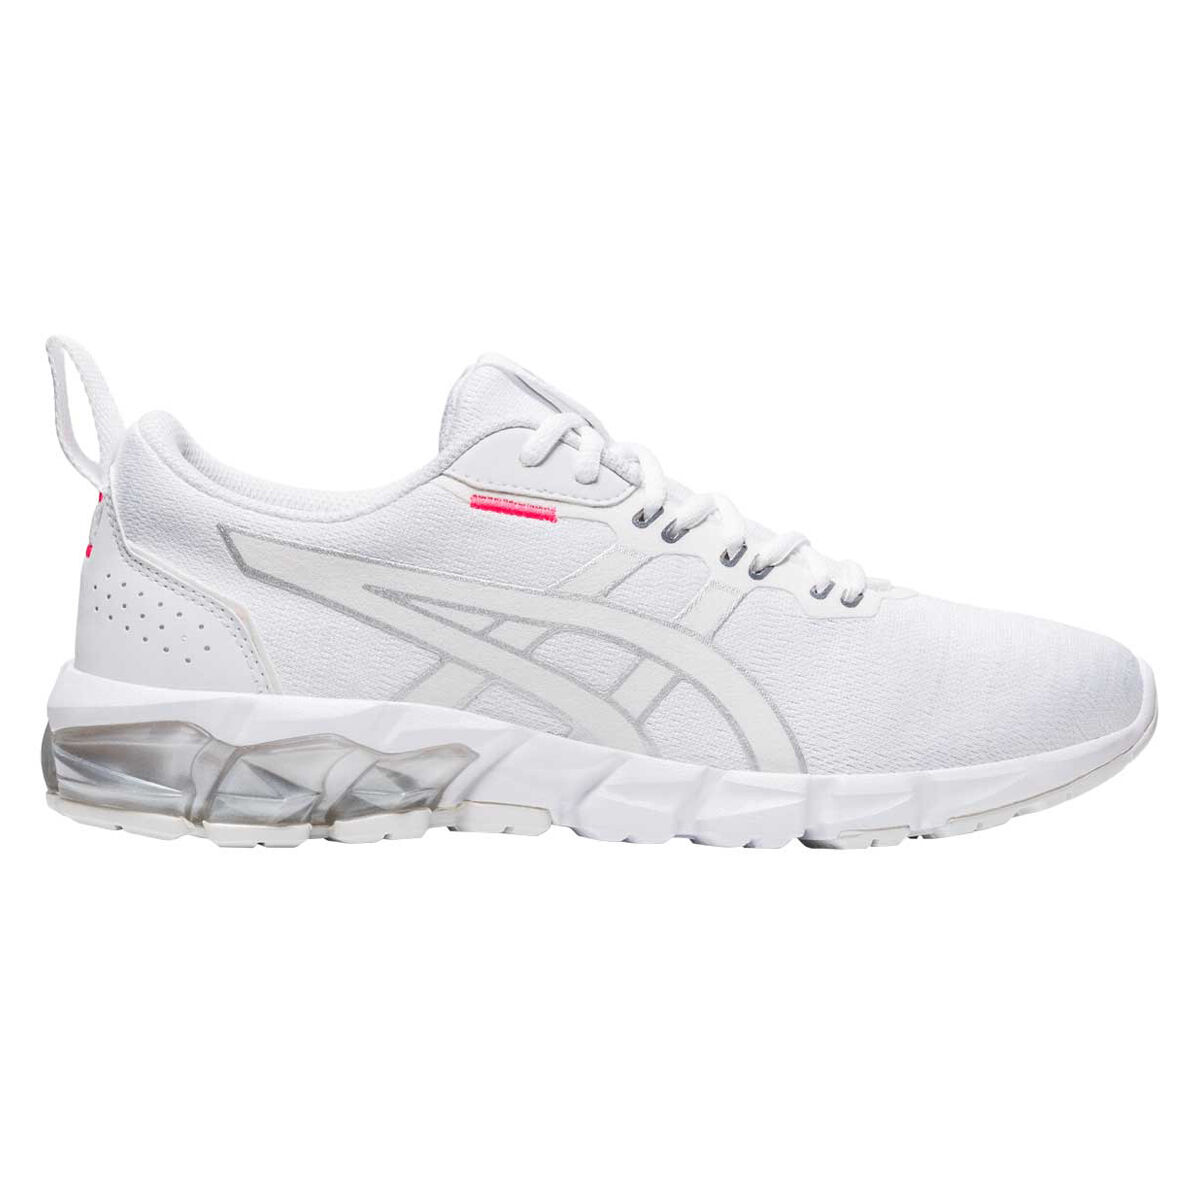 asics white casual shoes